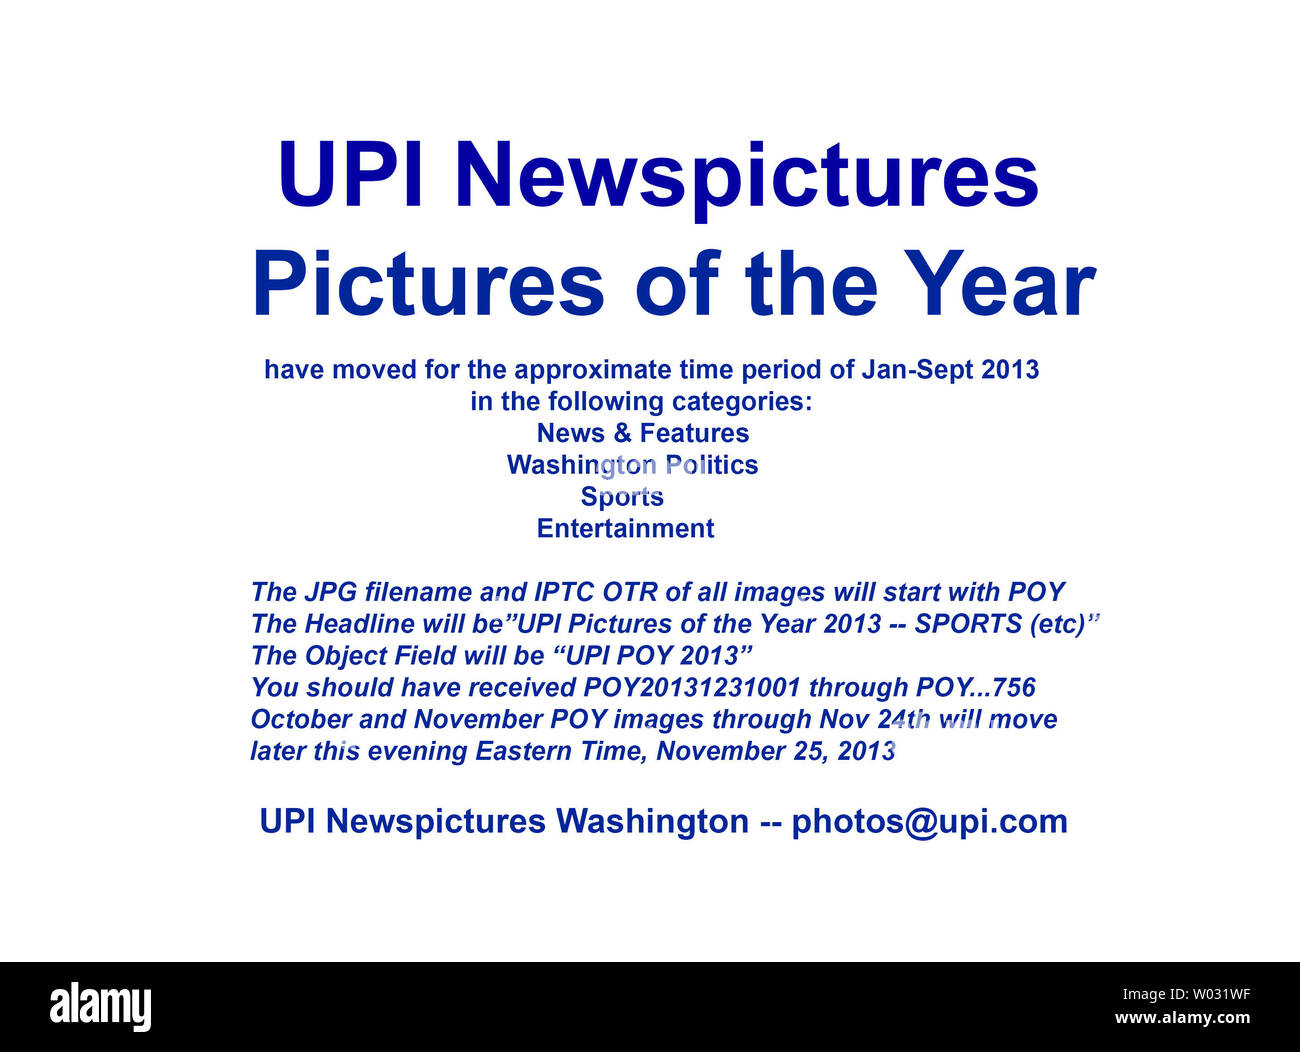 UPI Newspictures has  moved the 2013 Pictures of the Year (POY)  images for the approximate time period January through September.  We will move October through November 24th later tonight Eastern time.    You should have already  received image transmission numbers POY20131231001 through POY...756  in the following categories:  News & Features, Washington Politics, Sports, and Entertainment.  Further POY images will move on merit through the end of the year.  The JPG filename and IPTC OTR of all images will start with POY.  The Object Field will start with 'UPI POY 2013'.  Thank you,  UPI Was Stock Photo